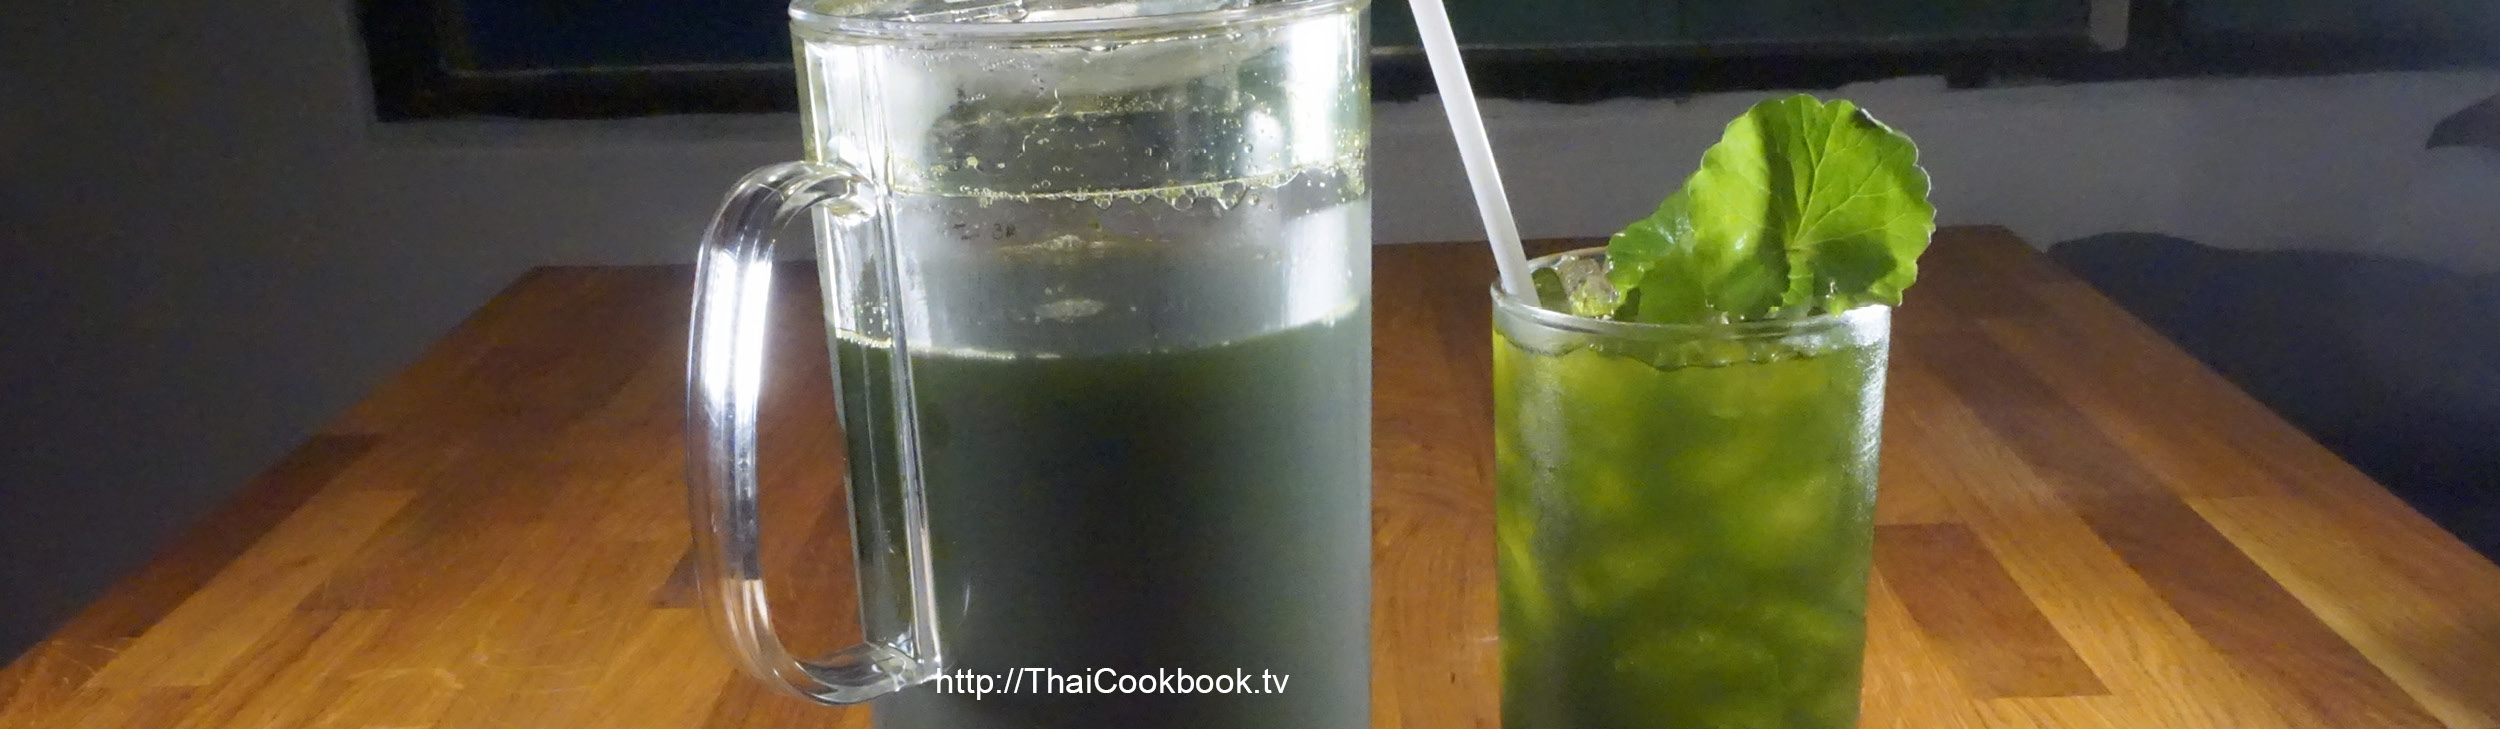 Authentic Thai recipe for Asian Pennywort Juice Drink